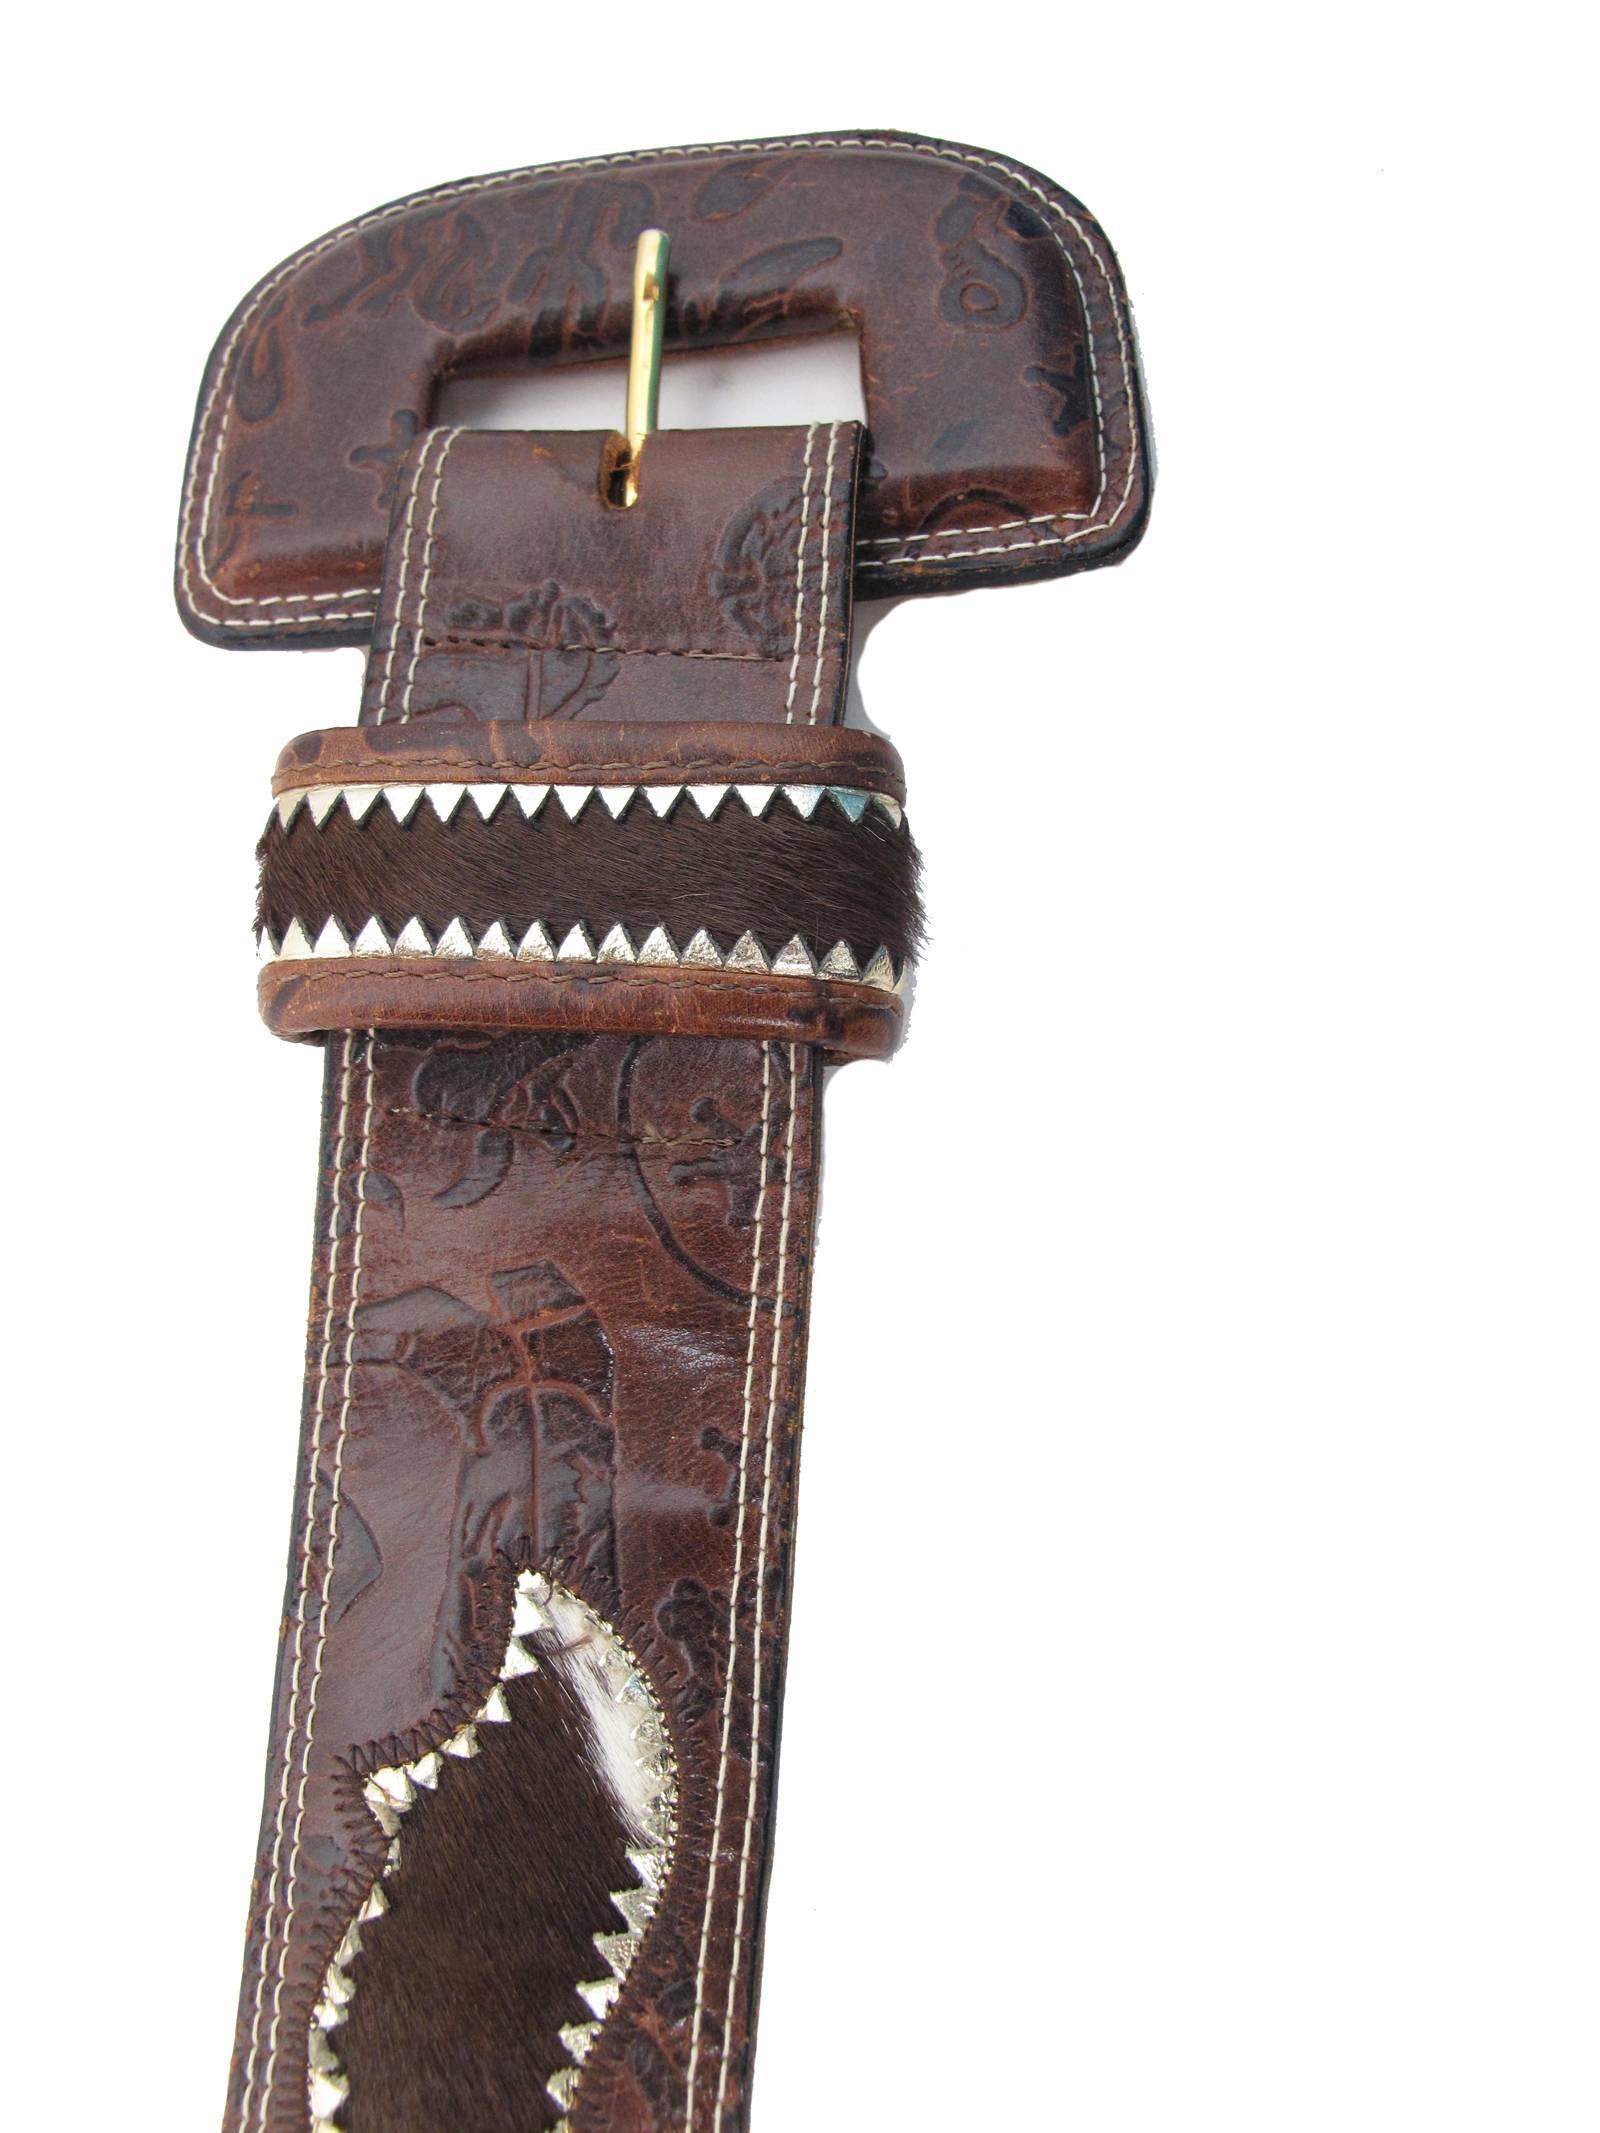 Carlos Falchi brown leather stamped western theme belt with pony fur inserts.  Condition: Good, some wear . fits waist 27 